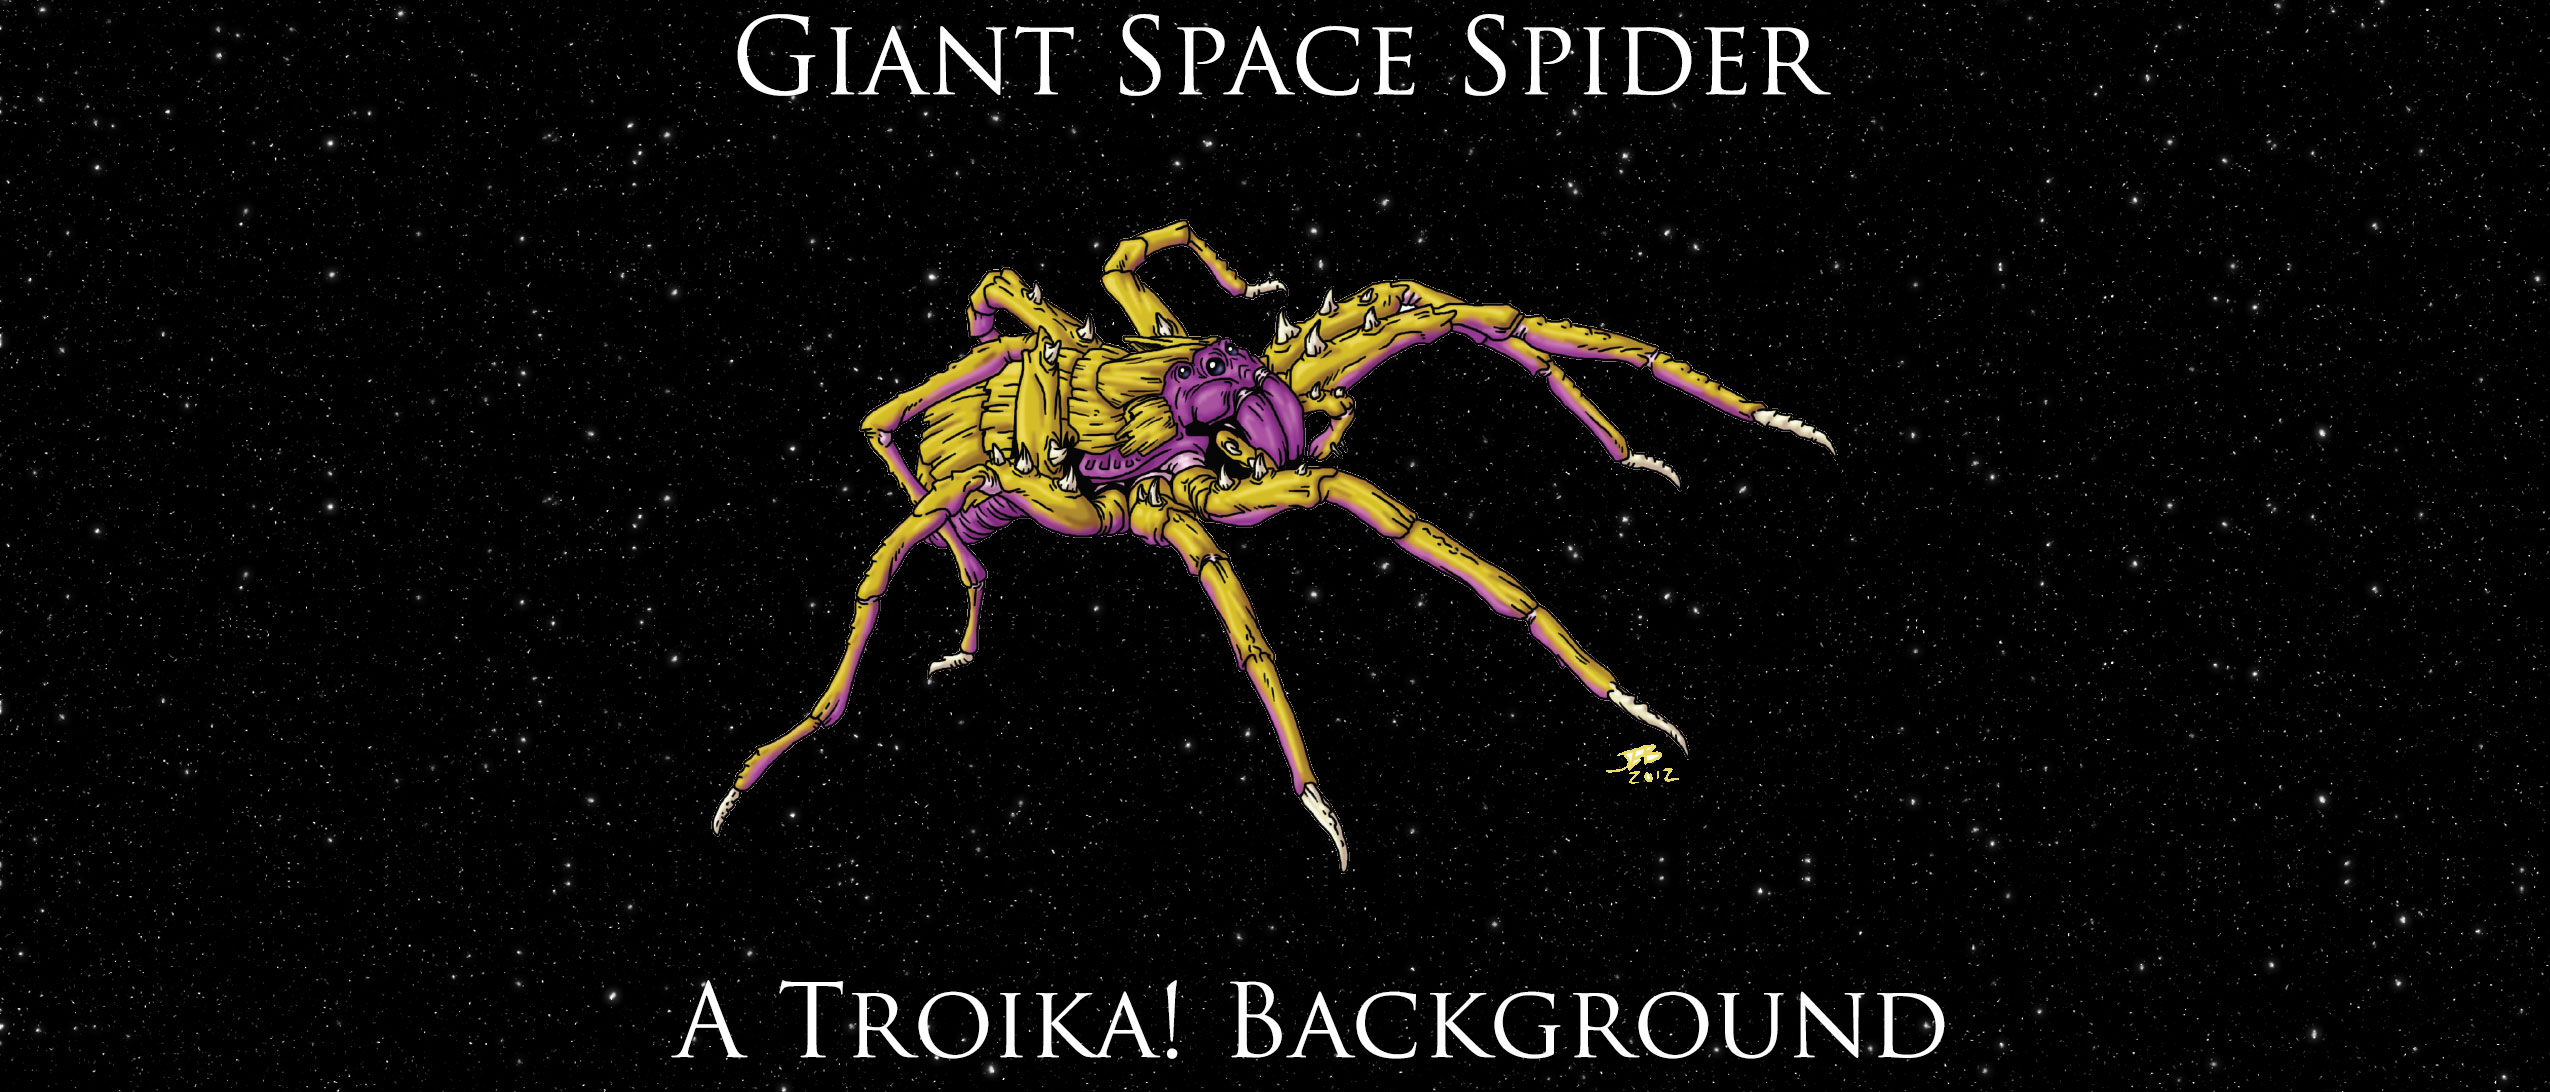 Giant Space Spider - A Troika! Background